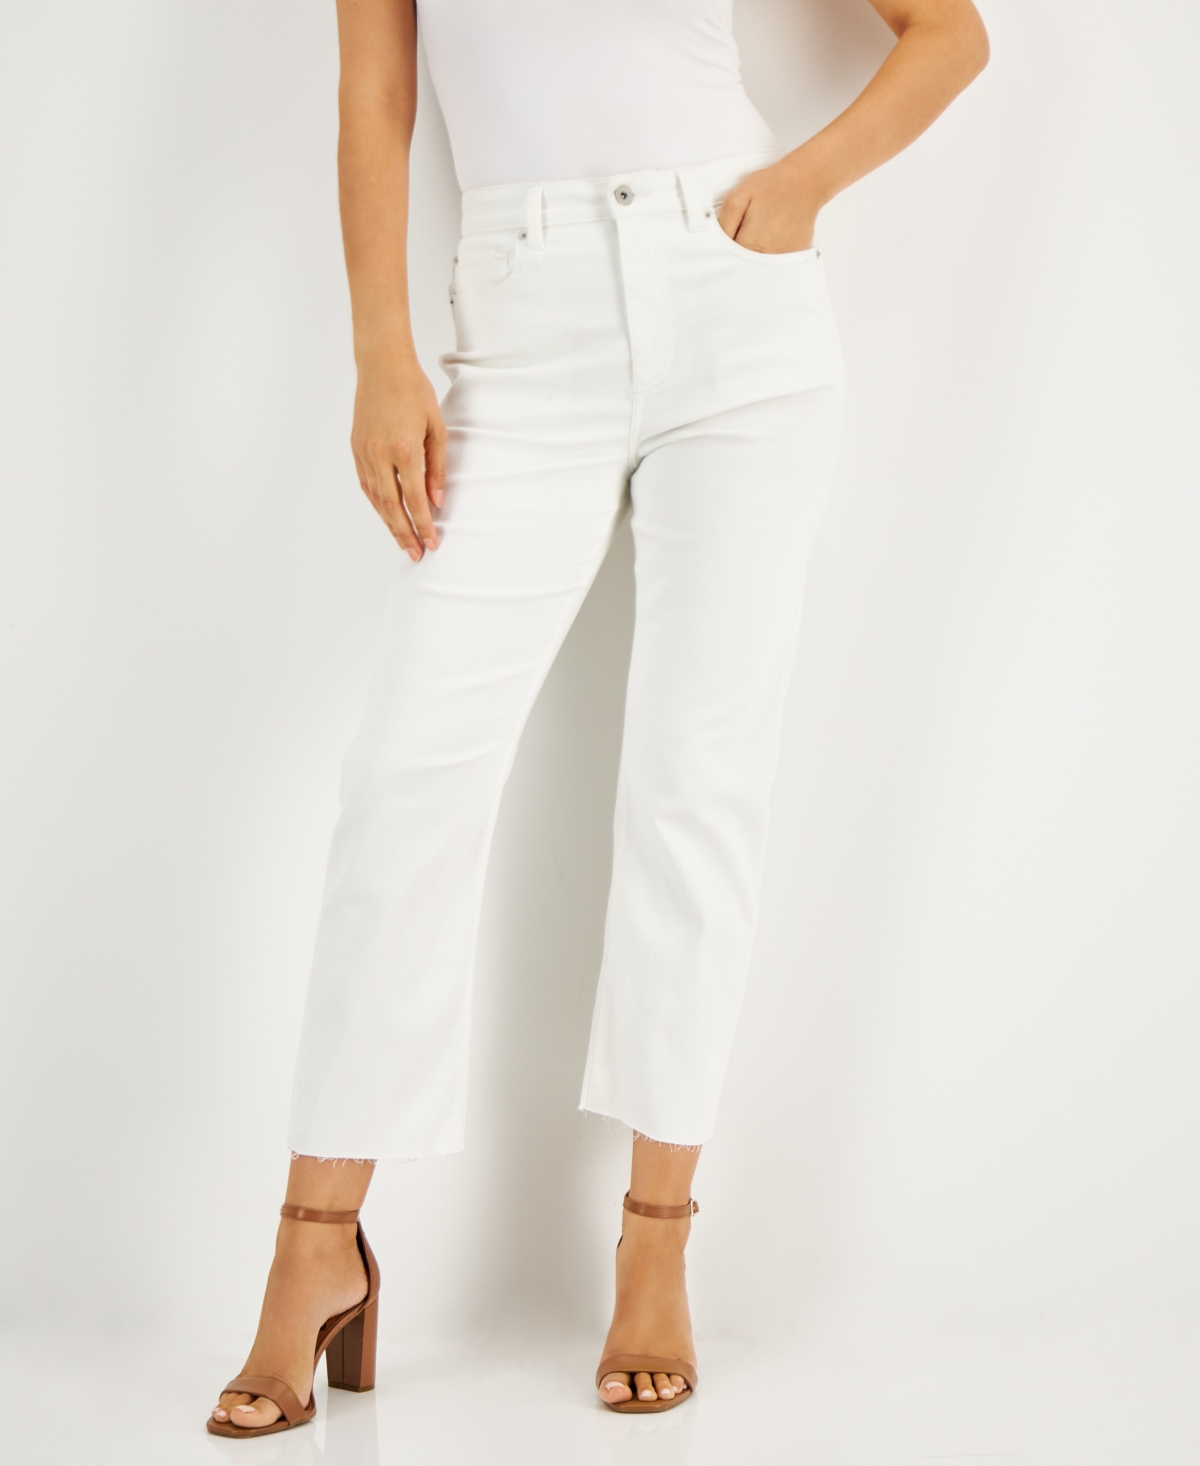  Inc International Concepts Women's Raw-Hem High-Rise Jeans, Created for Macy's